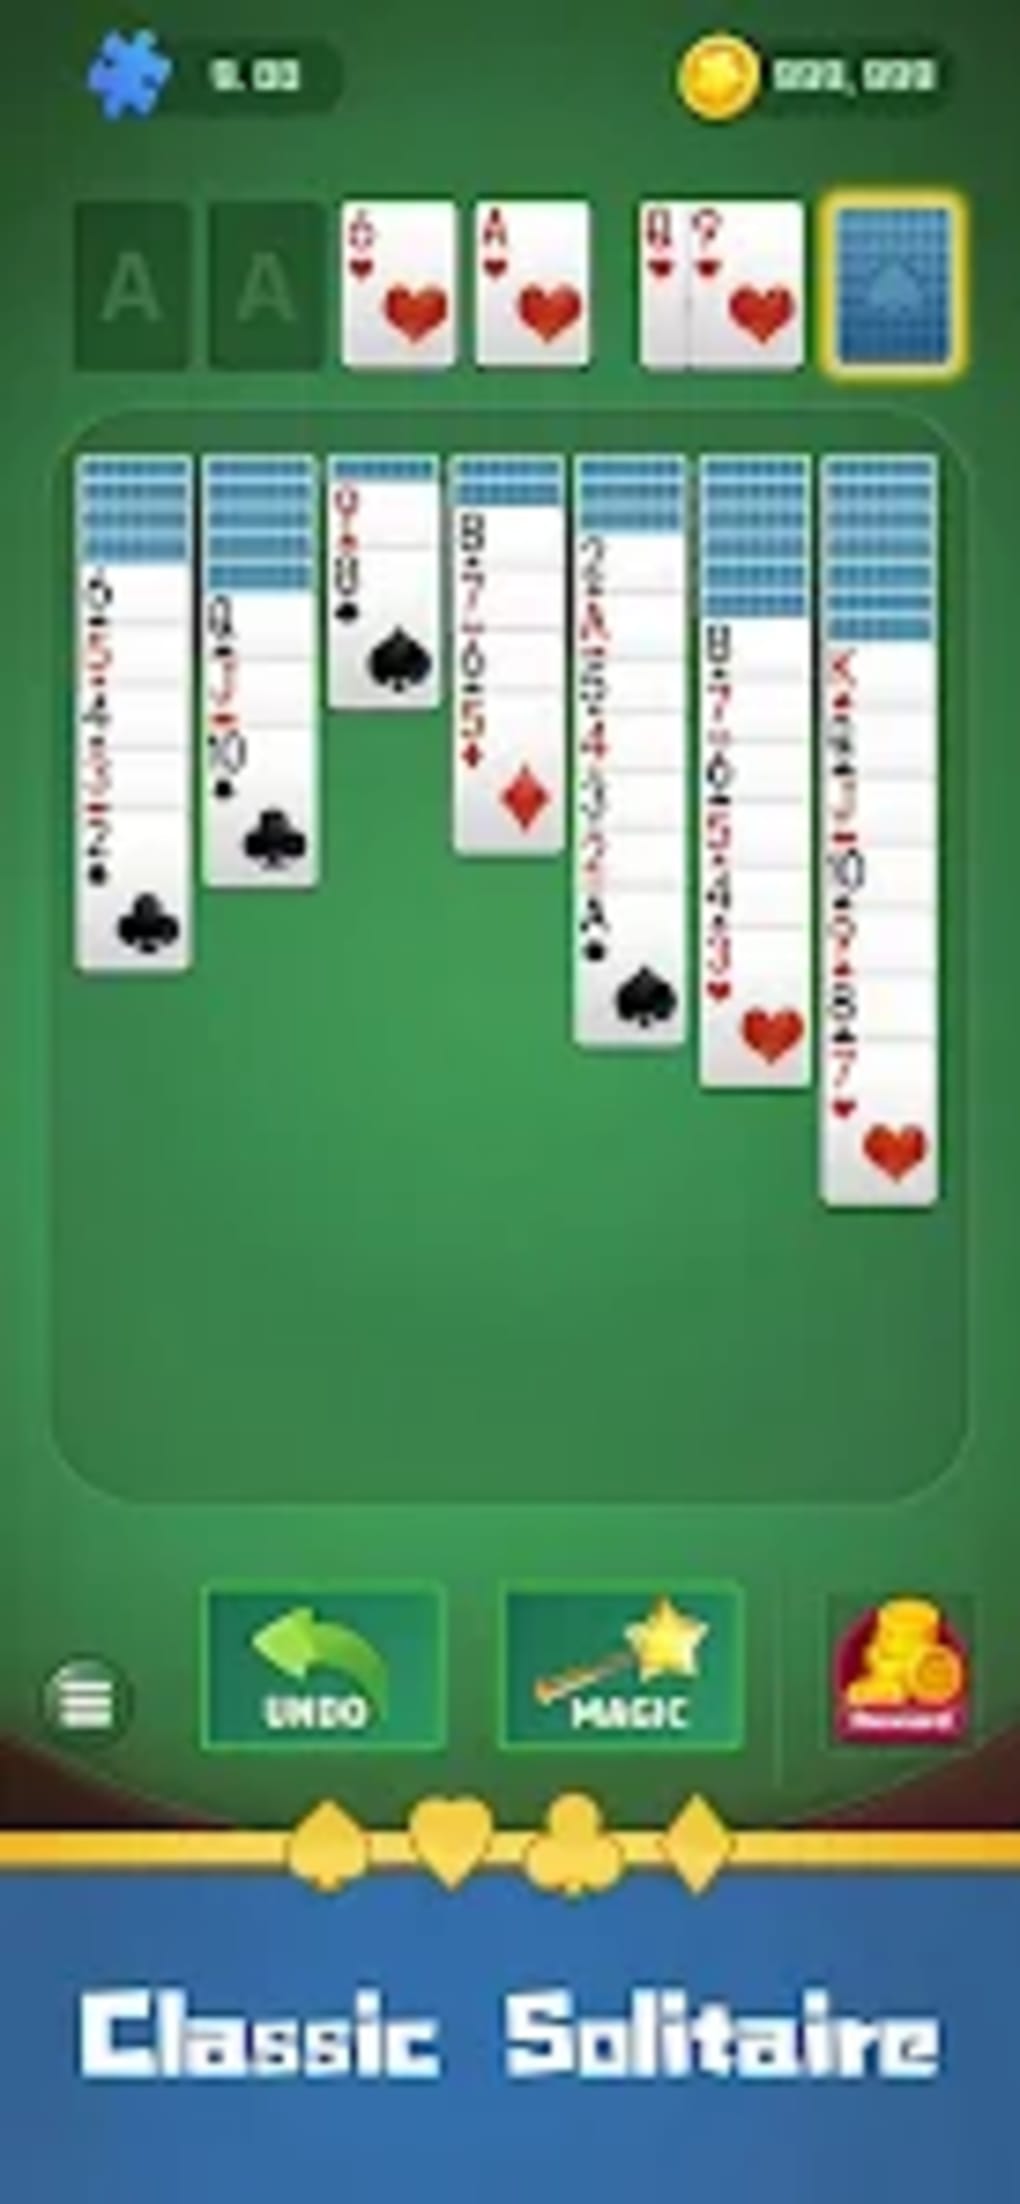 About: Solitaire-Cash Real Money guia (Google Play version)